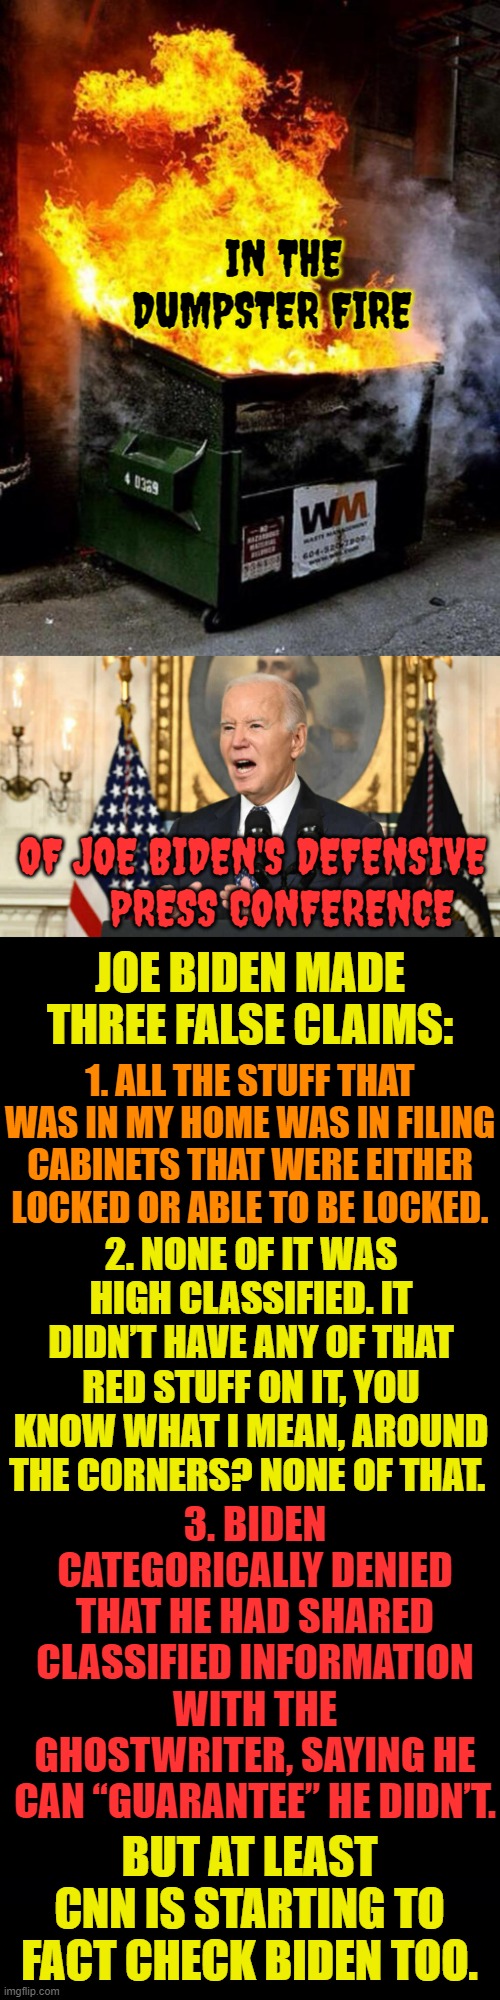 What Do You Know? | IN THE DUMPSTER FIRE; OF JOE BIDEN'S DEFENSIVE      PRESS CONFERENCE; JOE BIDEN MADE THREE FALSE CLAIMS:; 1. ALL THE STUFF THAT WAS IN MY HOME WAS IN FILING CABINETS THAT WERE EITHER LOCKED OR ABLE TO BE LOCKED. 2. NONE OF IT WAS HIGH CLASSIFIED. IT DIDN’T HAVE ANY OF THAT RED STUFF ON IT, YOU KNOW WHAT I MEAN, AROUND THE CORNERS? NONE OF THAT. 3. BIDEN CATEGORICALLY DENIED THAT HE HAD SHARED CLASSIFIED INFORMATION WITH THE GHOSTWRITER, SAYING HE CAN “GUARANTEE” HE DIDN’T. BUT AT LEAST CNN IS STARTING TO FACT CHECK BIDEN TOO. | image tagged in dumpster fire,joe biden,press conference,lies,memes,politics | made w/ Imgflip meme maker